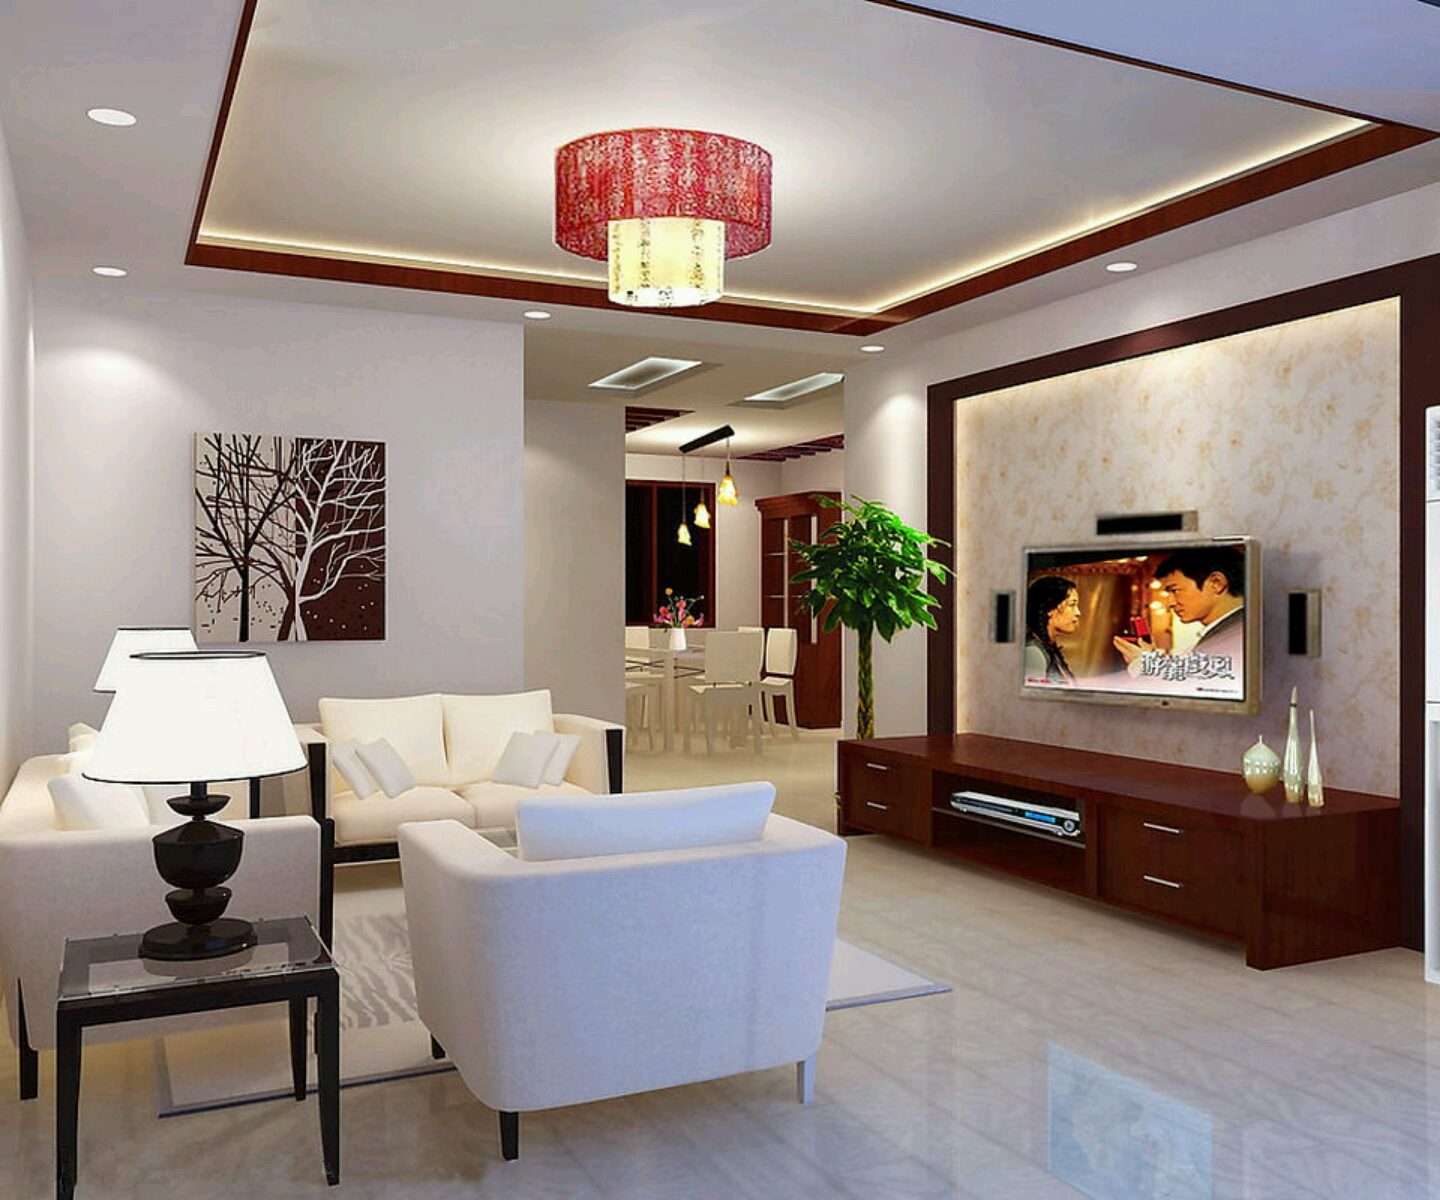 Living Room Decorating Ideas Indian Style - Home Decoration & Design Ideas